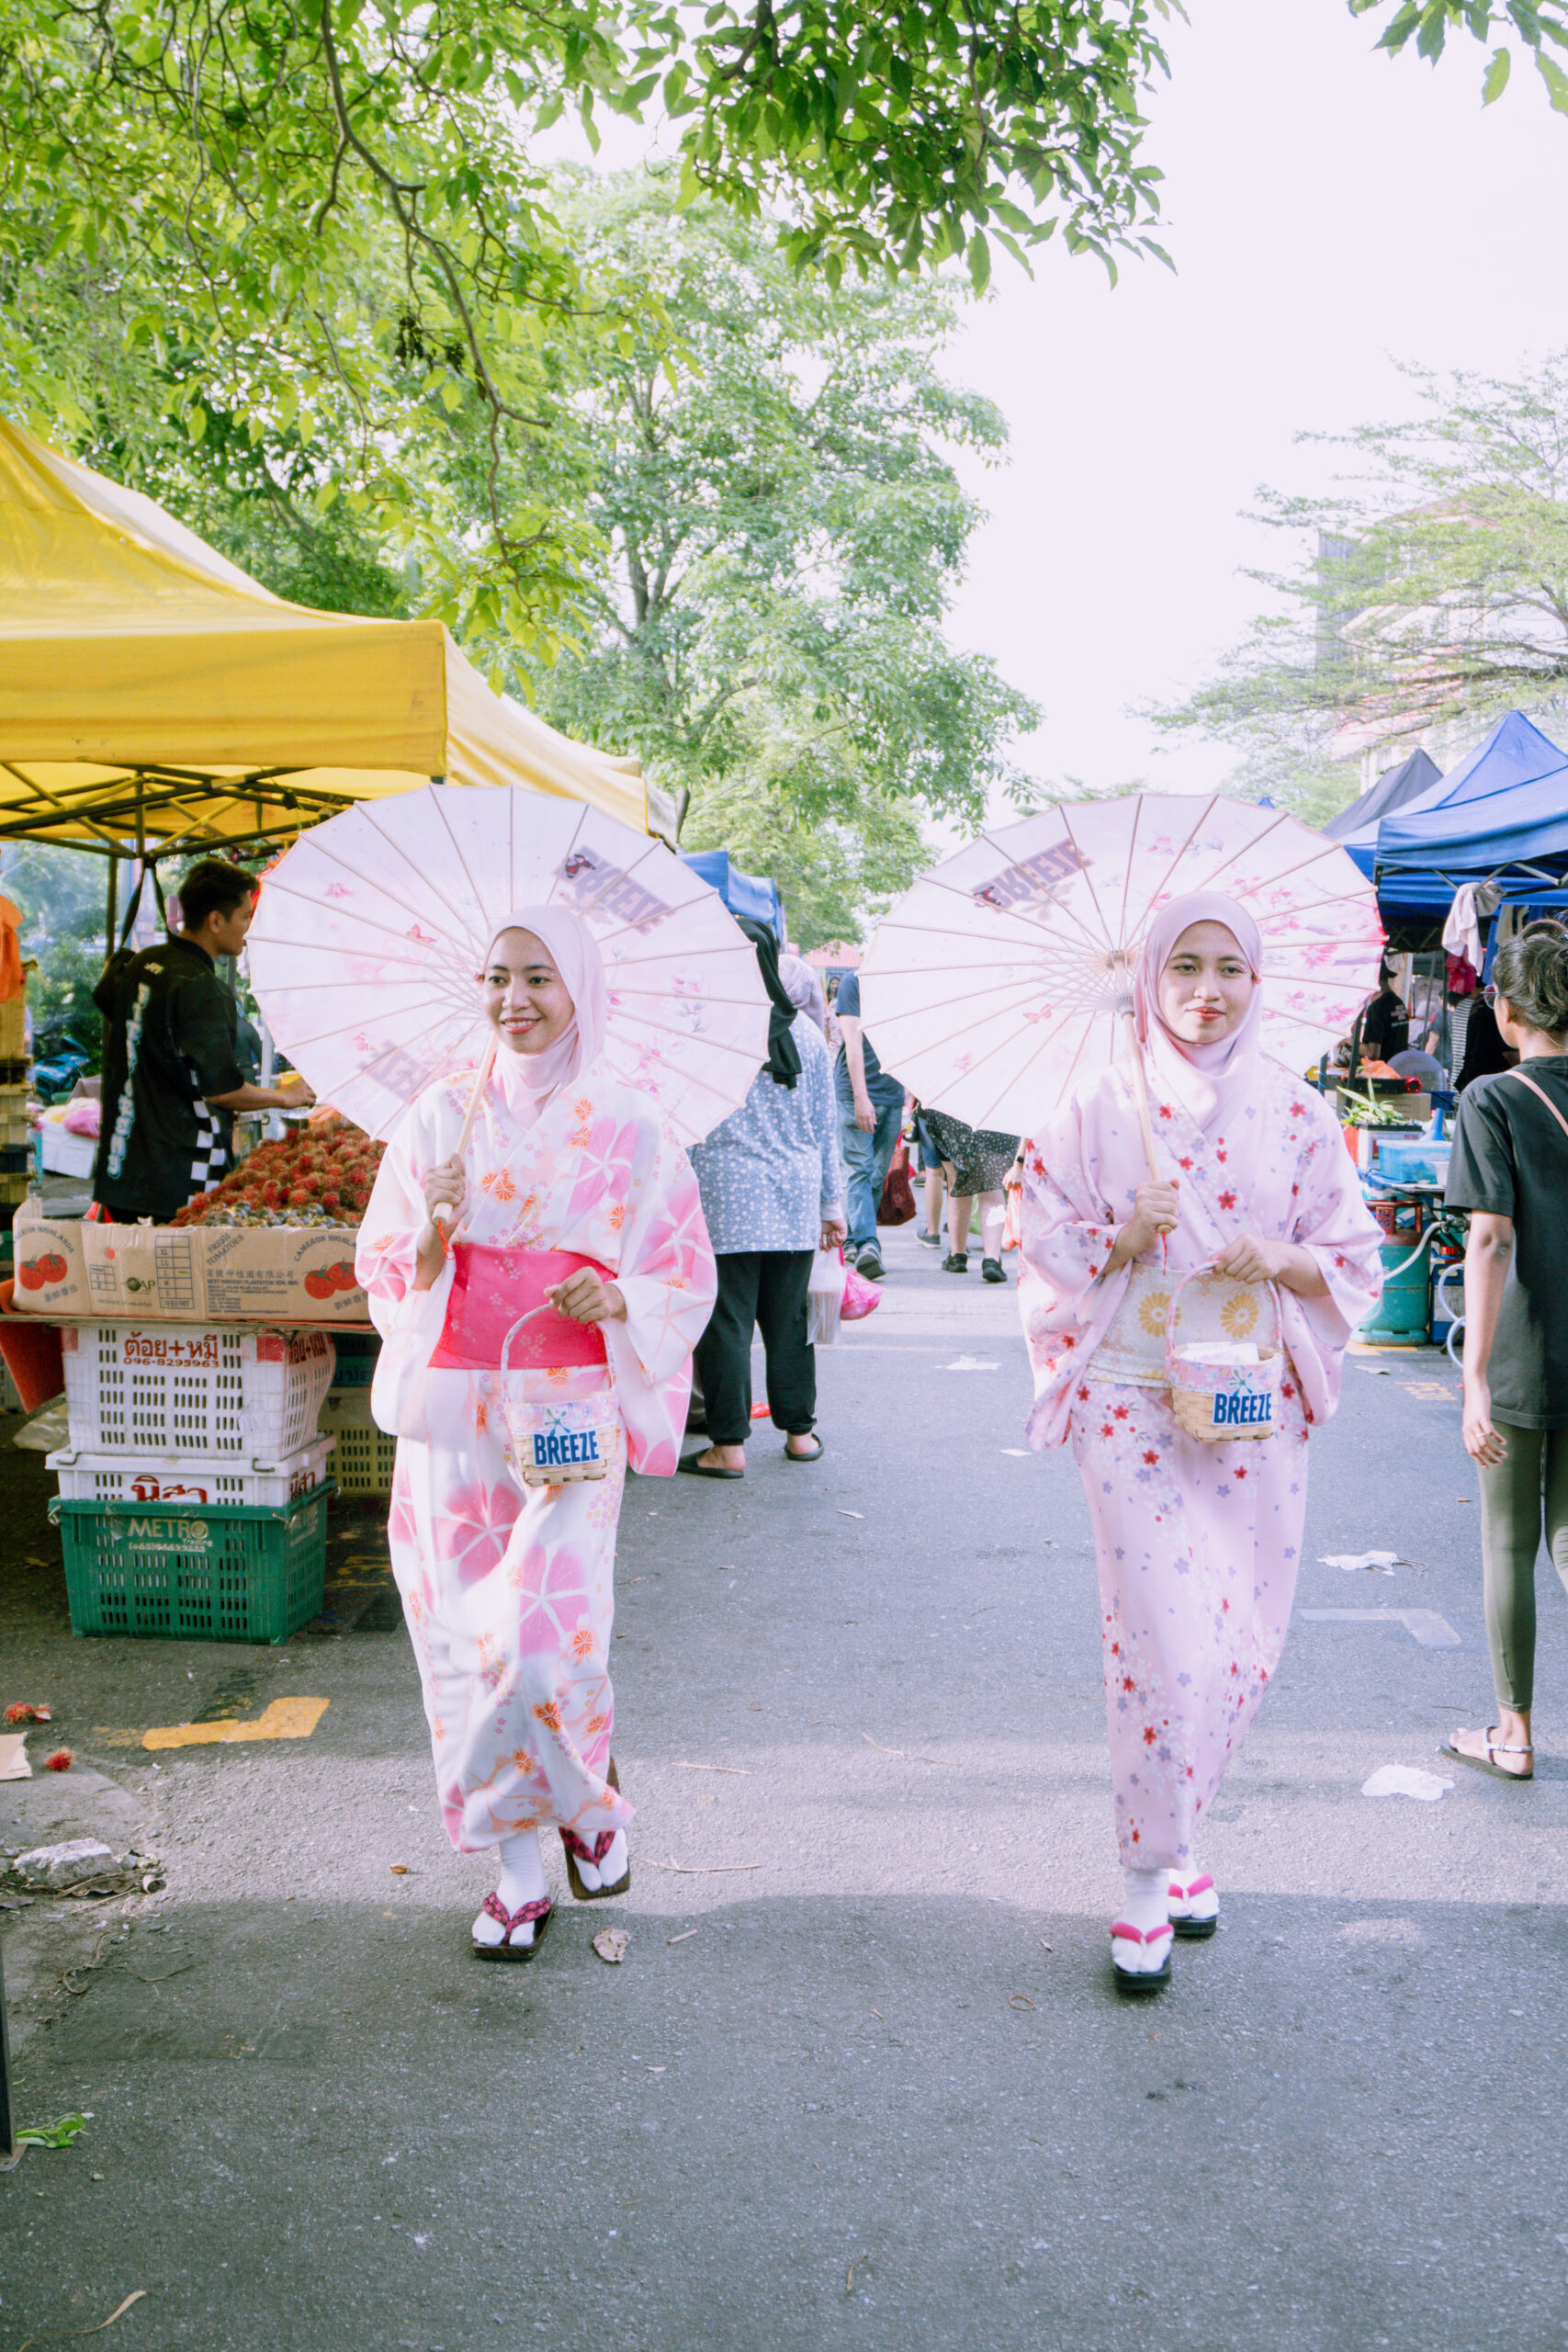 Whole setia alam pasar malam’s been smelling like…sakura lately. But why is that? | weirdkaya